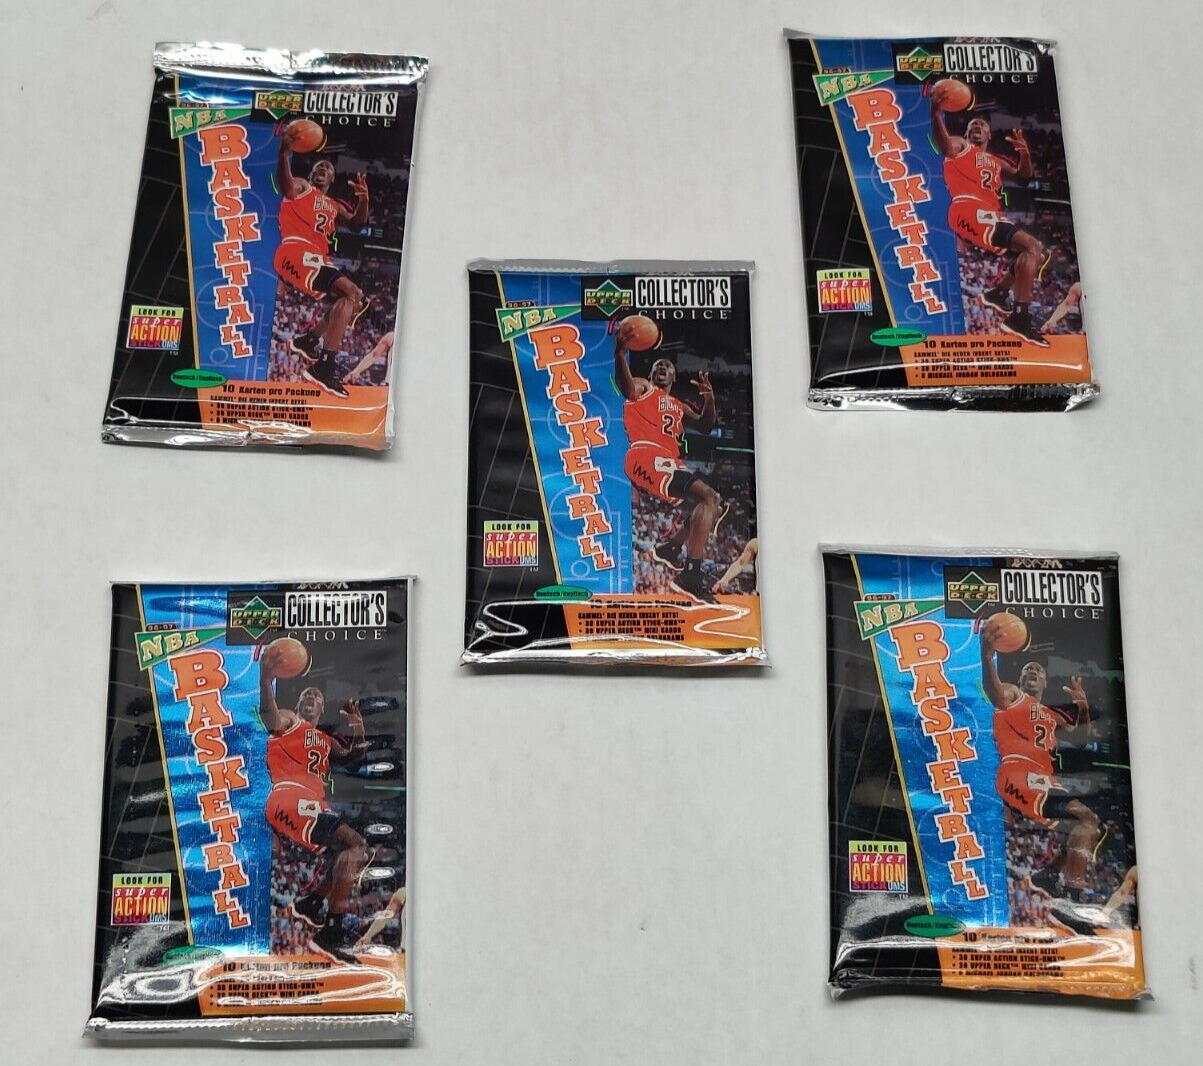 1996-97 Basketball Upper Deck Collectors Choice Series 1 10 Cards 5 Packs